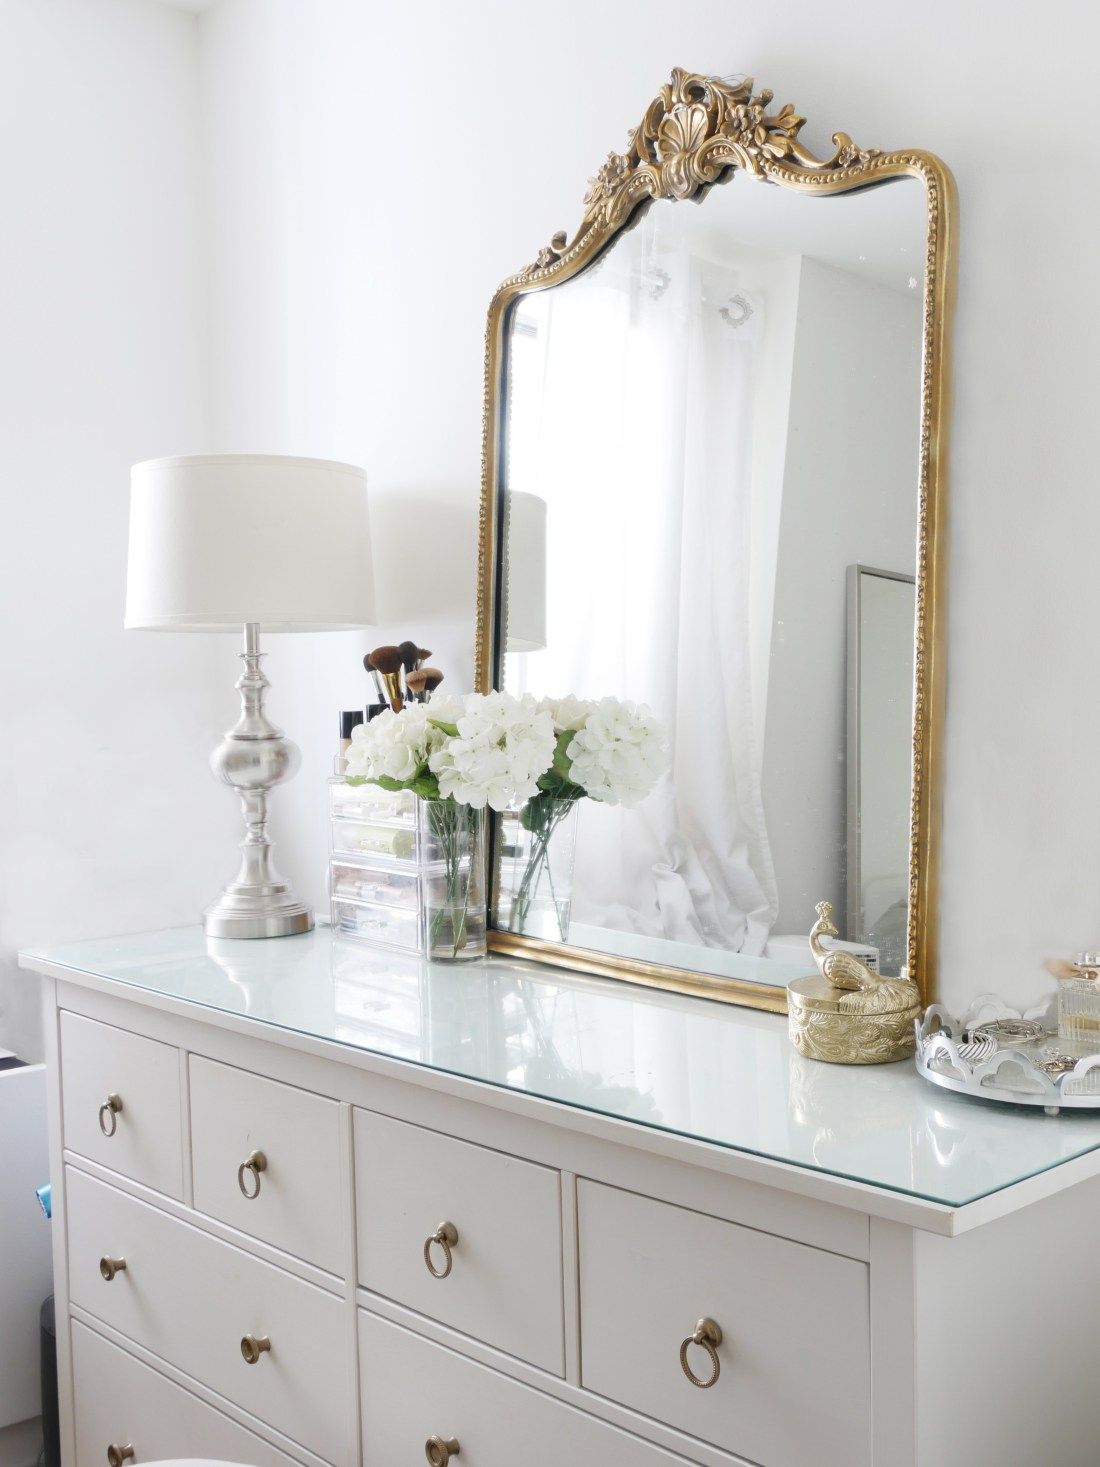 Bedroom Dresser Decor with gold Parisian mirror and silver table lamp via citychicdecor